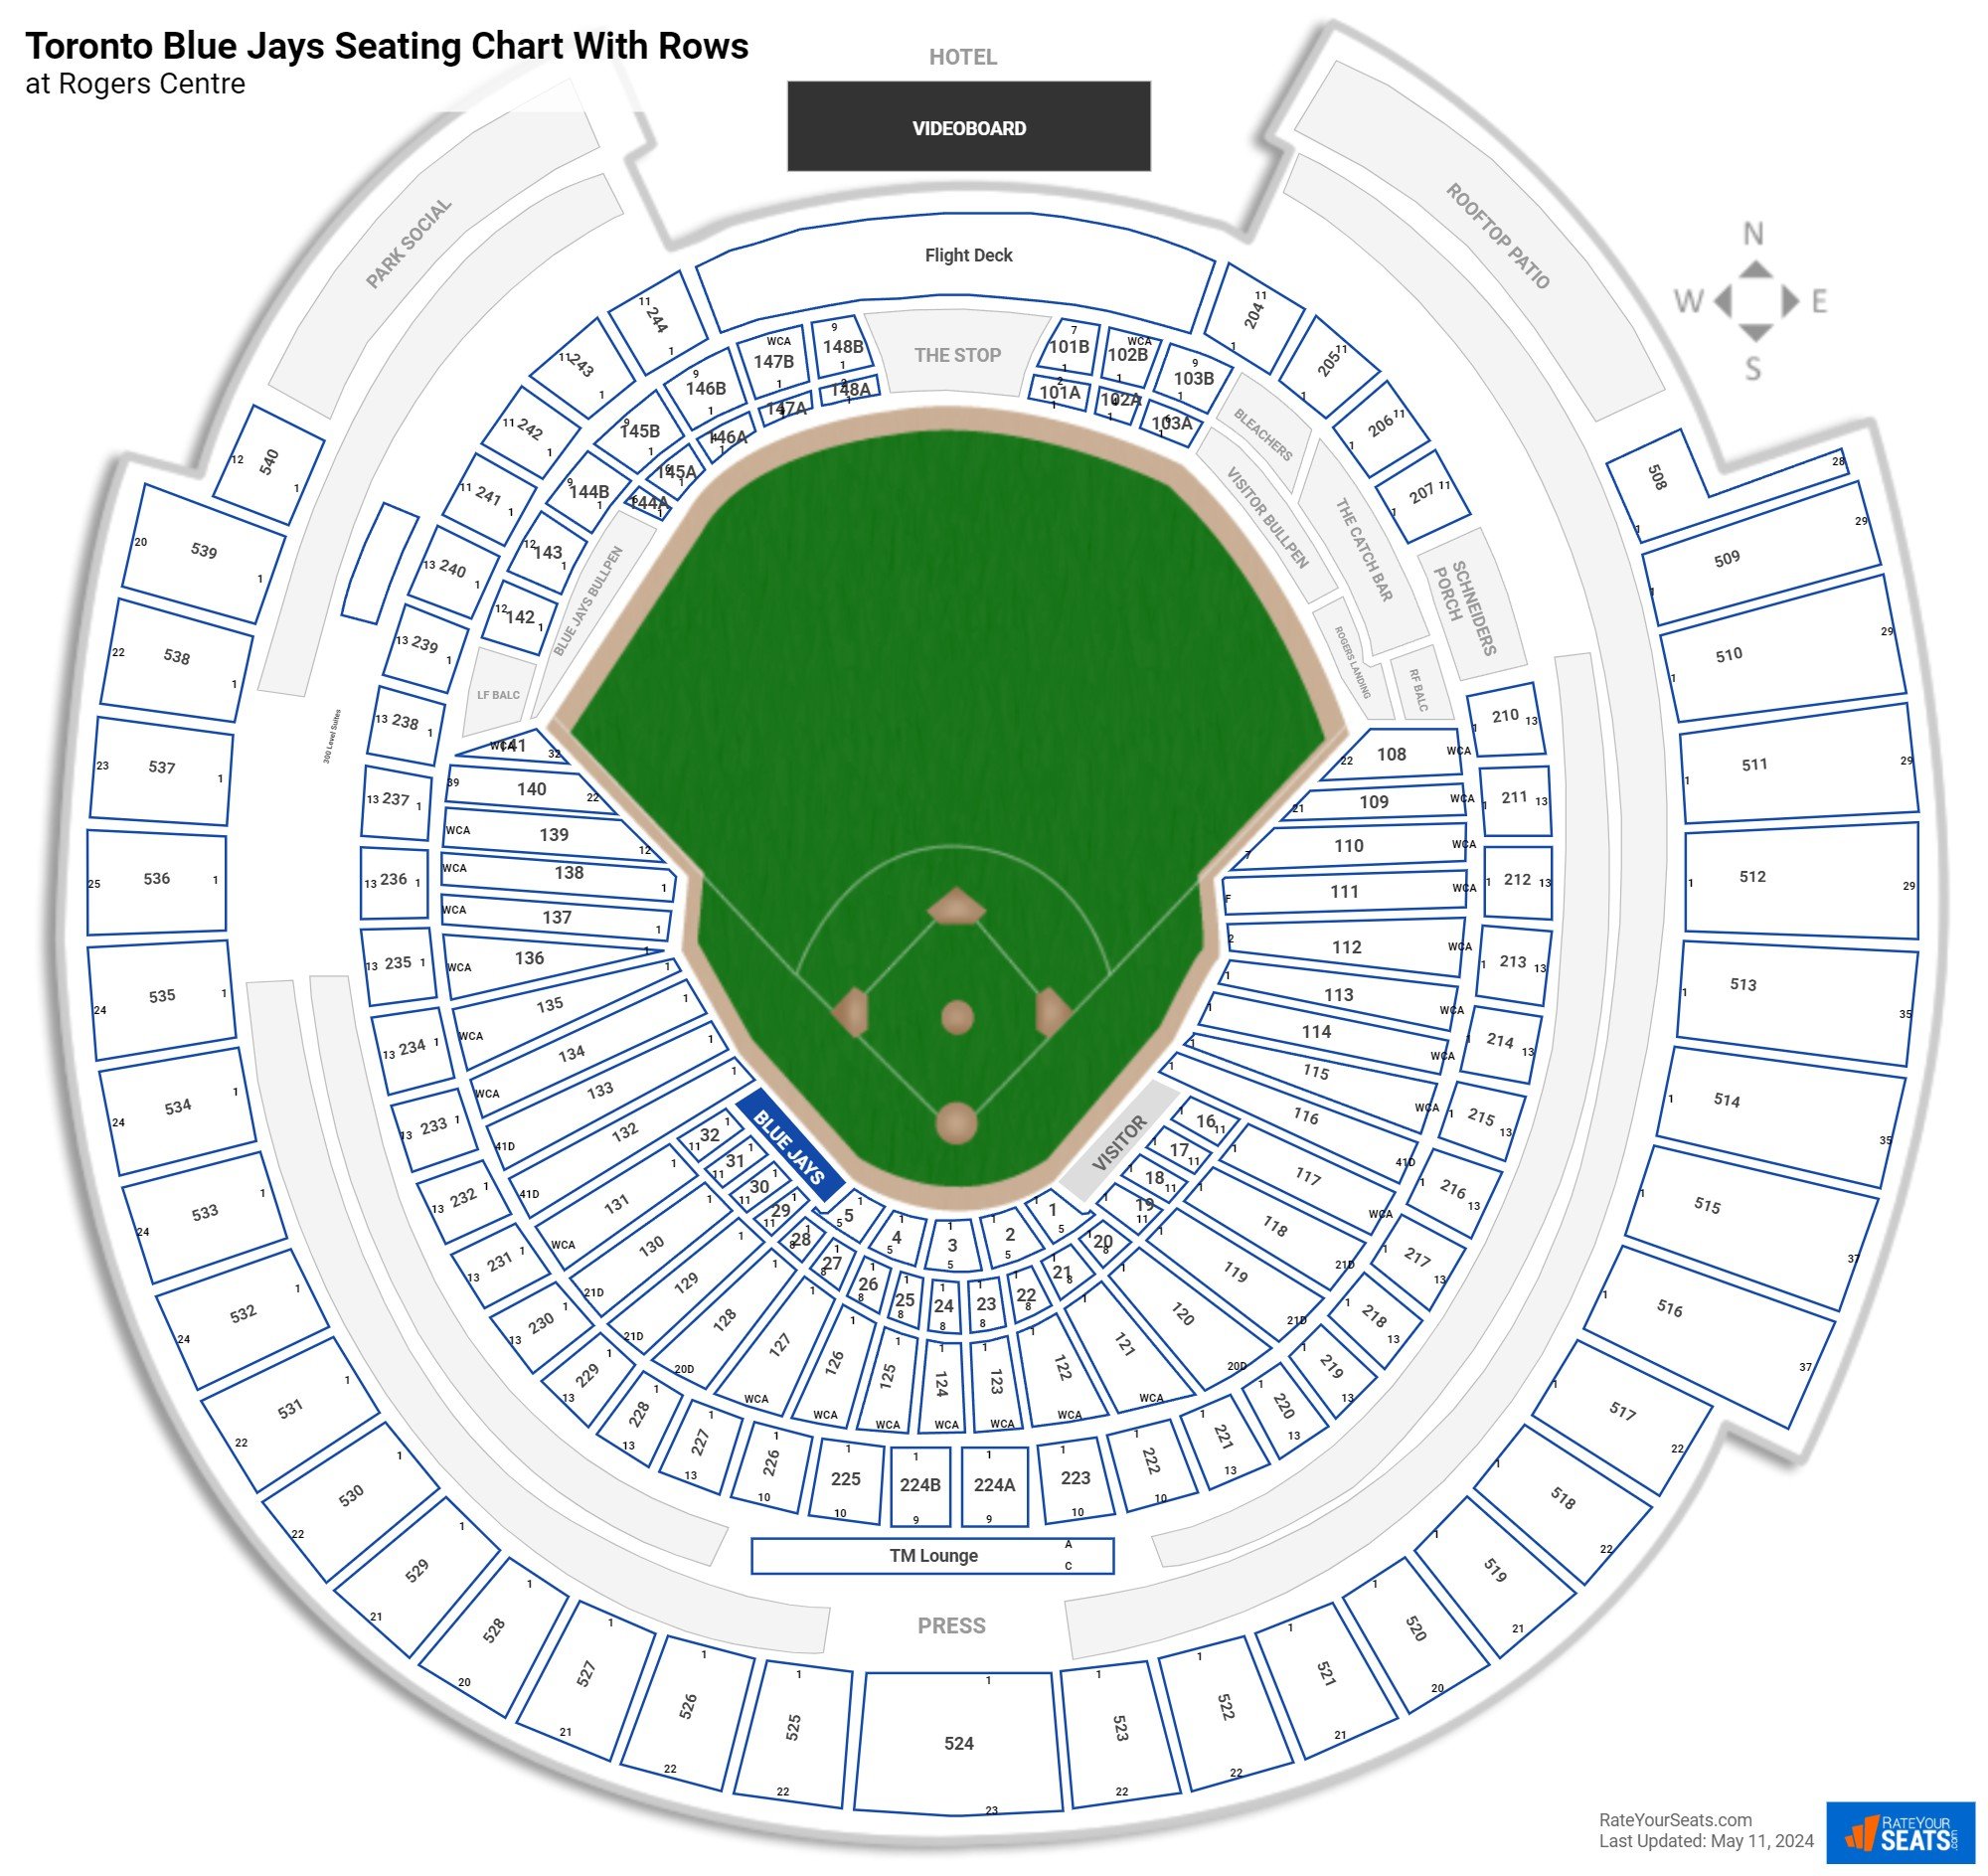 Toronto Blue Jays Seating Charts at Rogers Centre